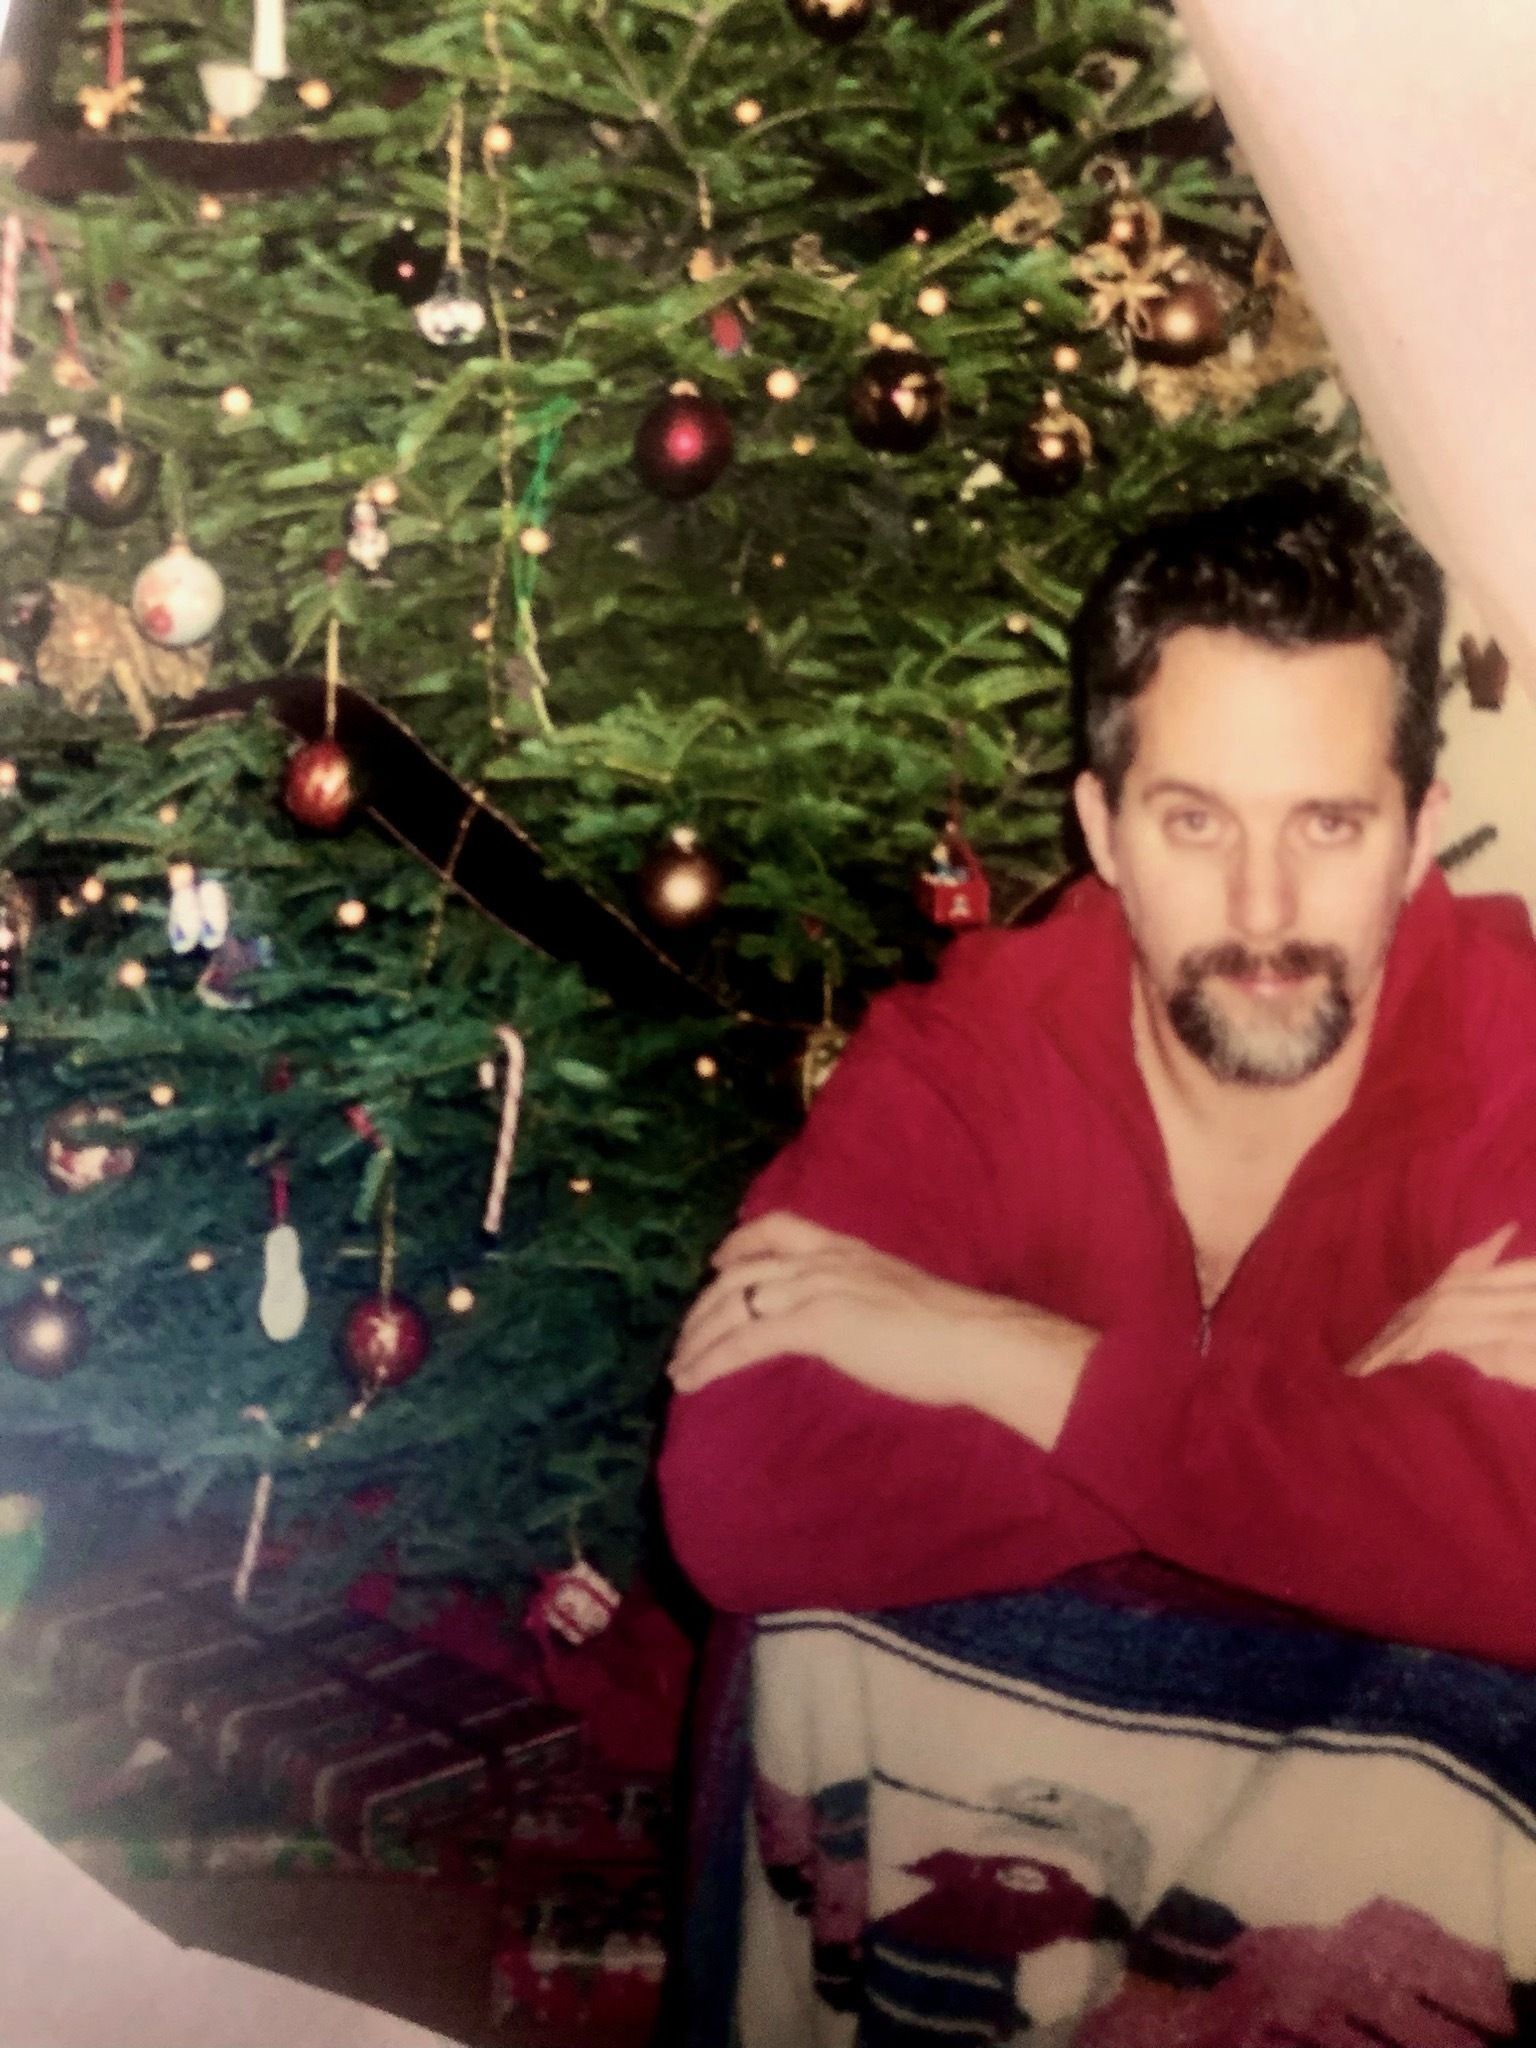 White man poses next to a Christmas tree in a red shirt.